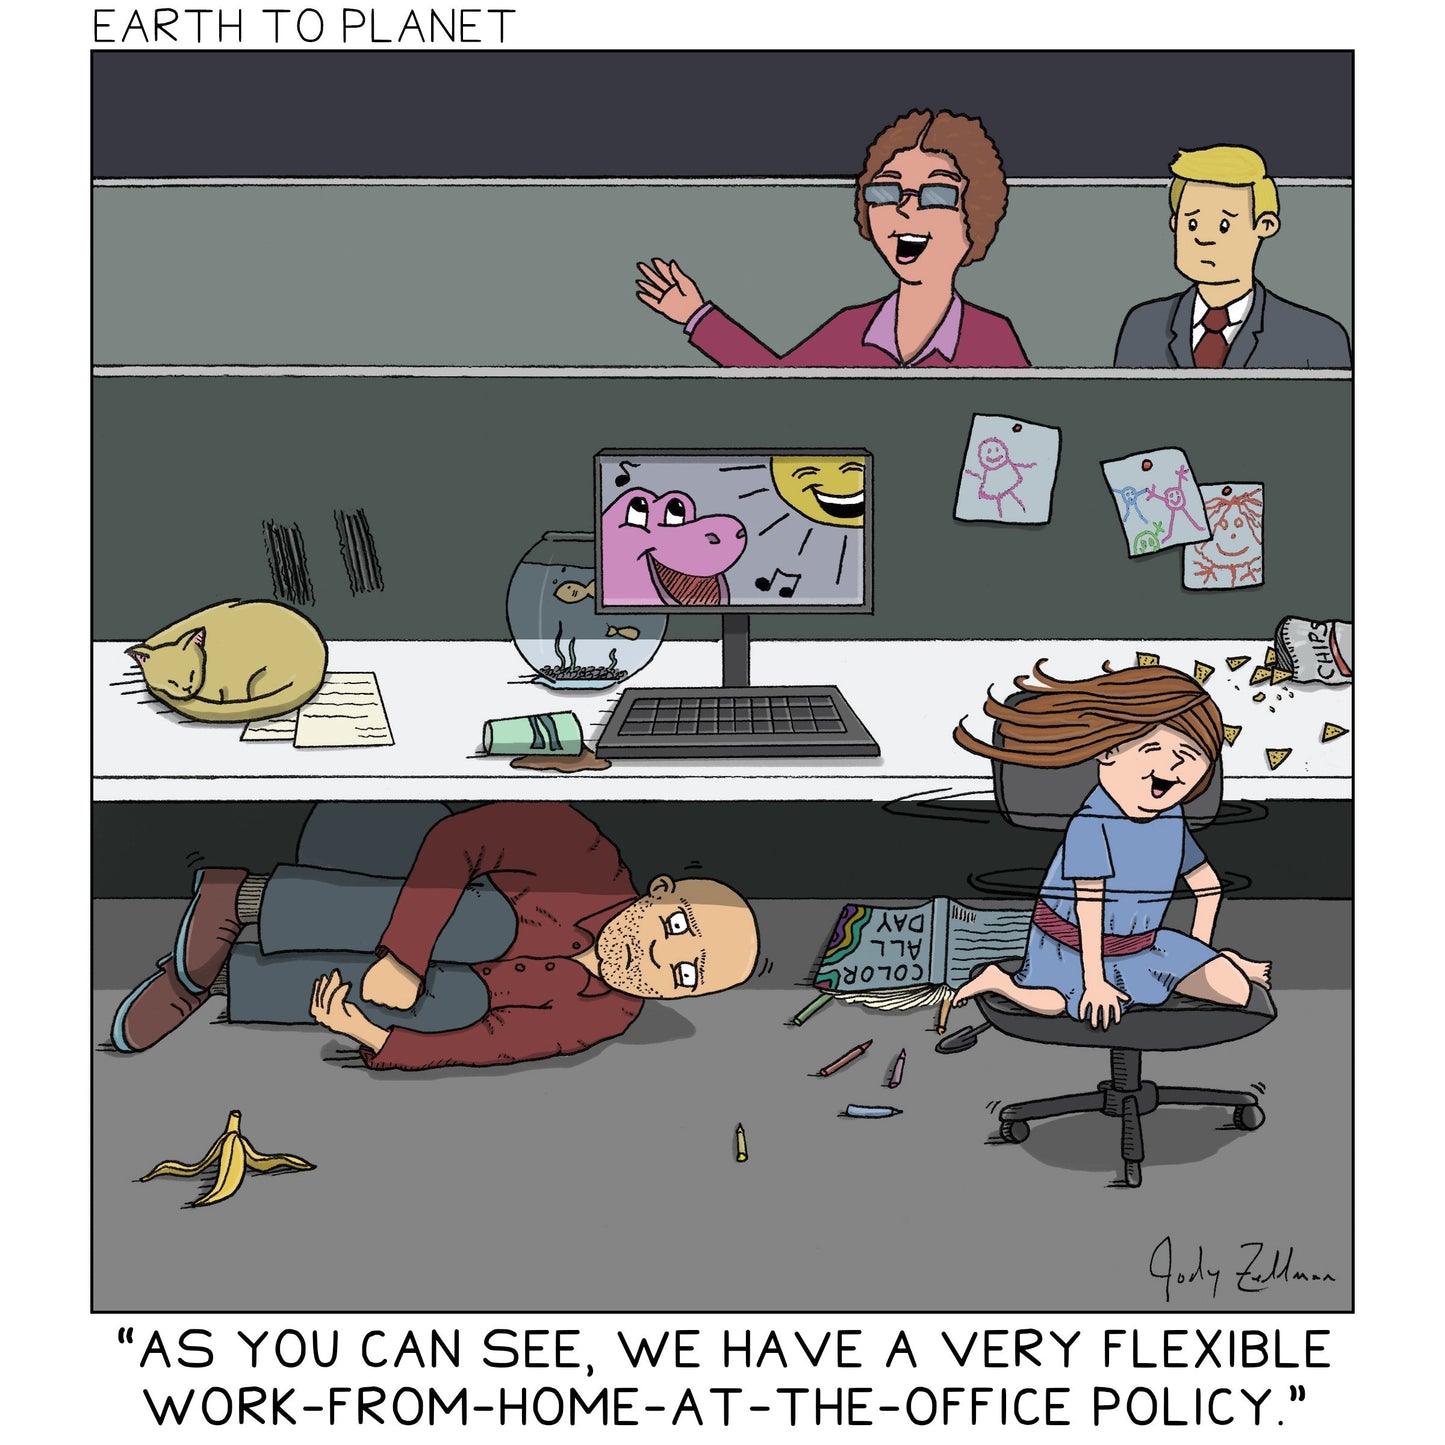 Work-From-Home-At-The-Office Cartoon